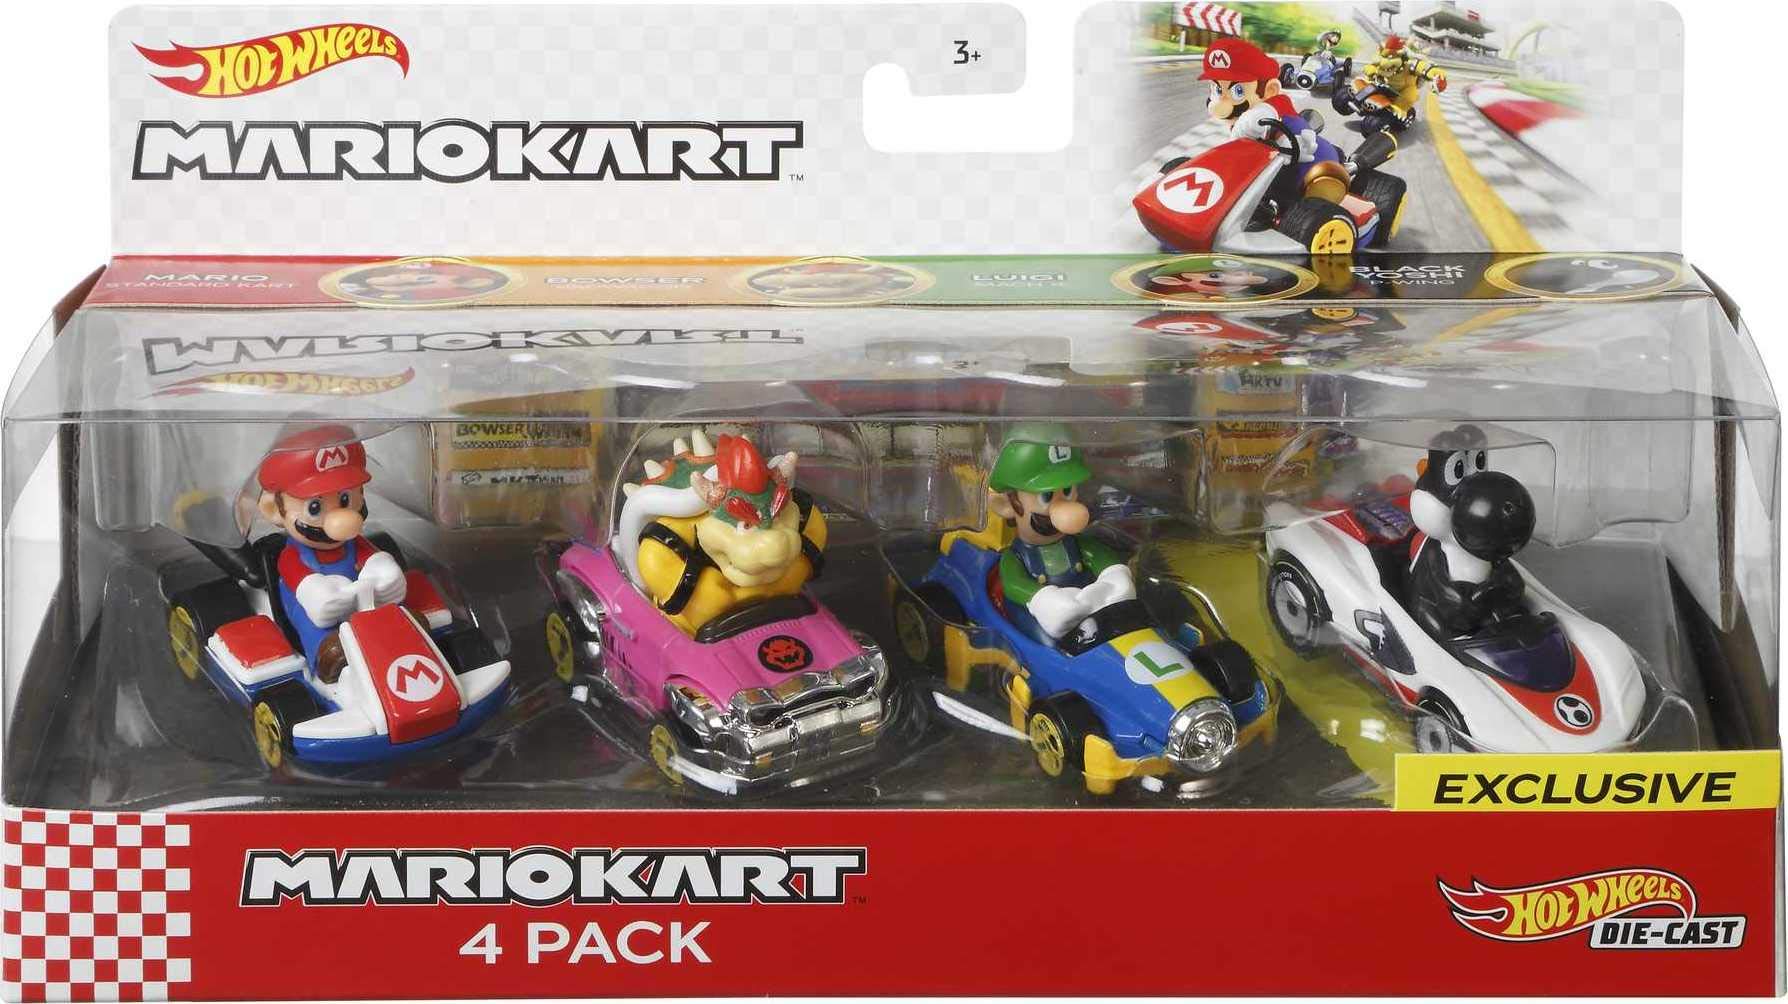 Hot Wheels Mario Kart characters and Karts as Hot Wheels Die-cast Toy cars 4-Pack Exclusive]